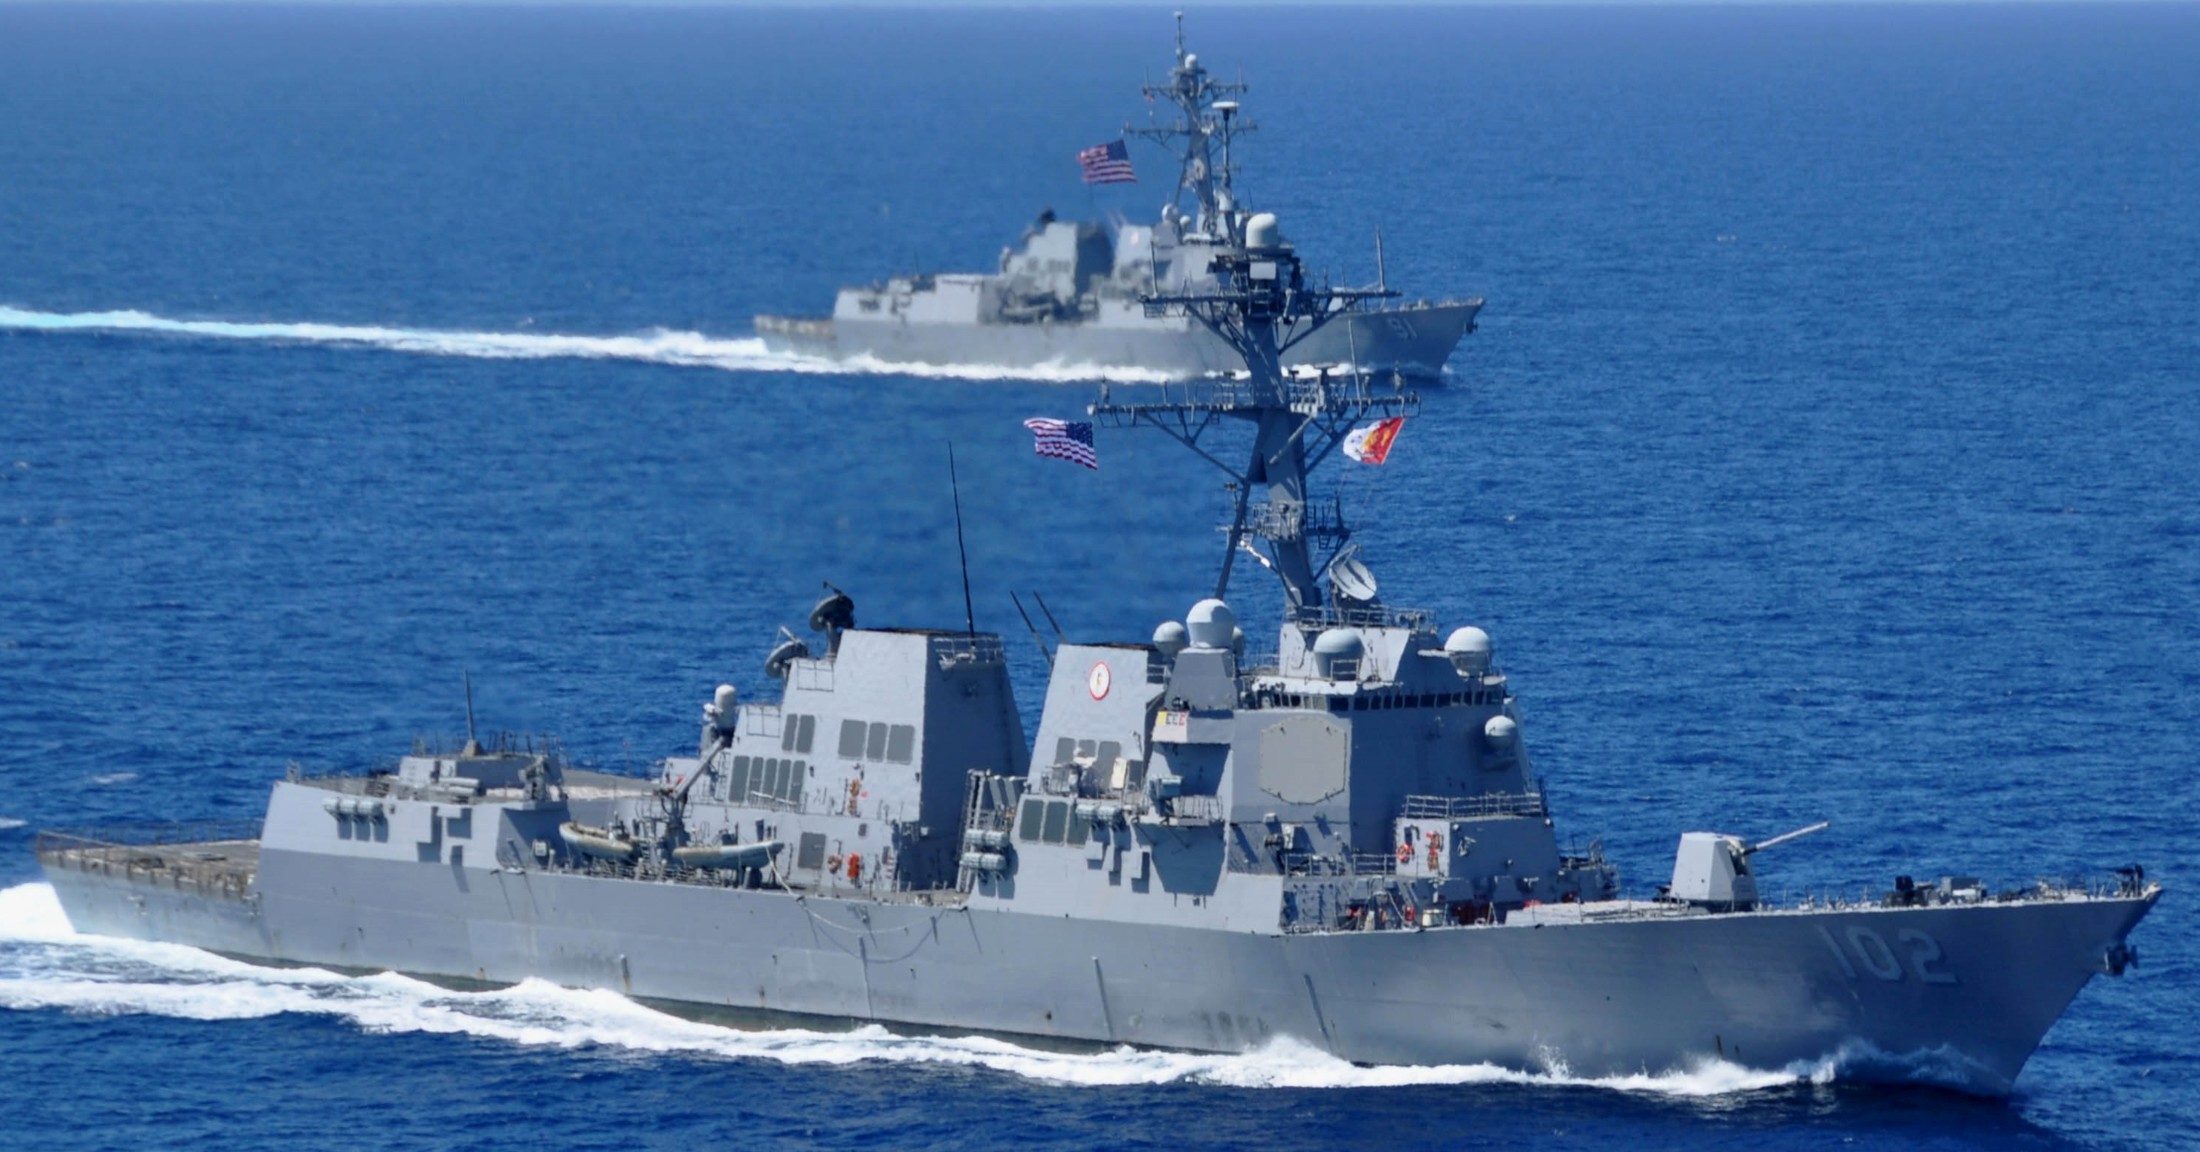 ddg-102 uss sampson guided missile destroyer 2010 38 south china sea